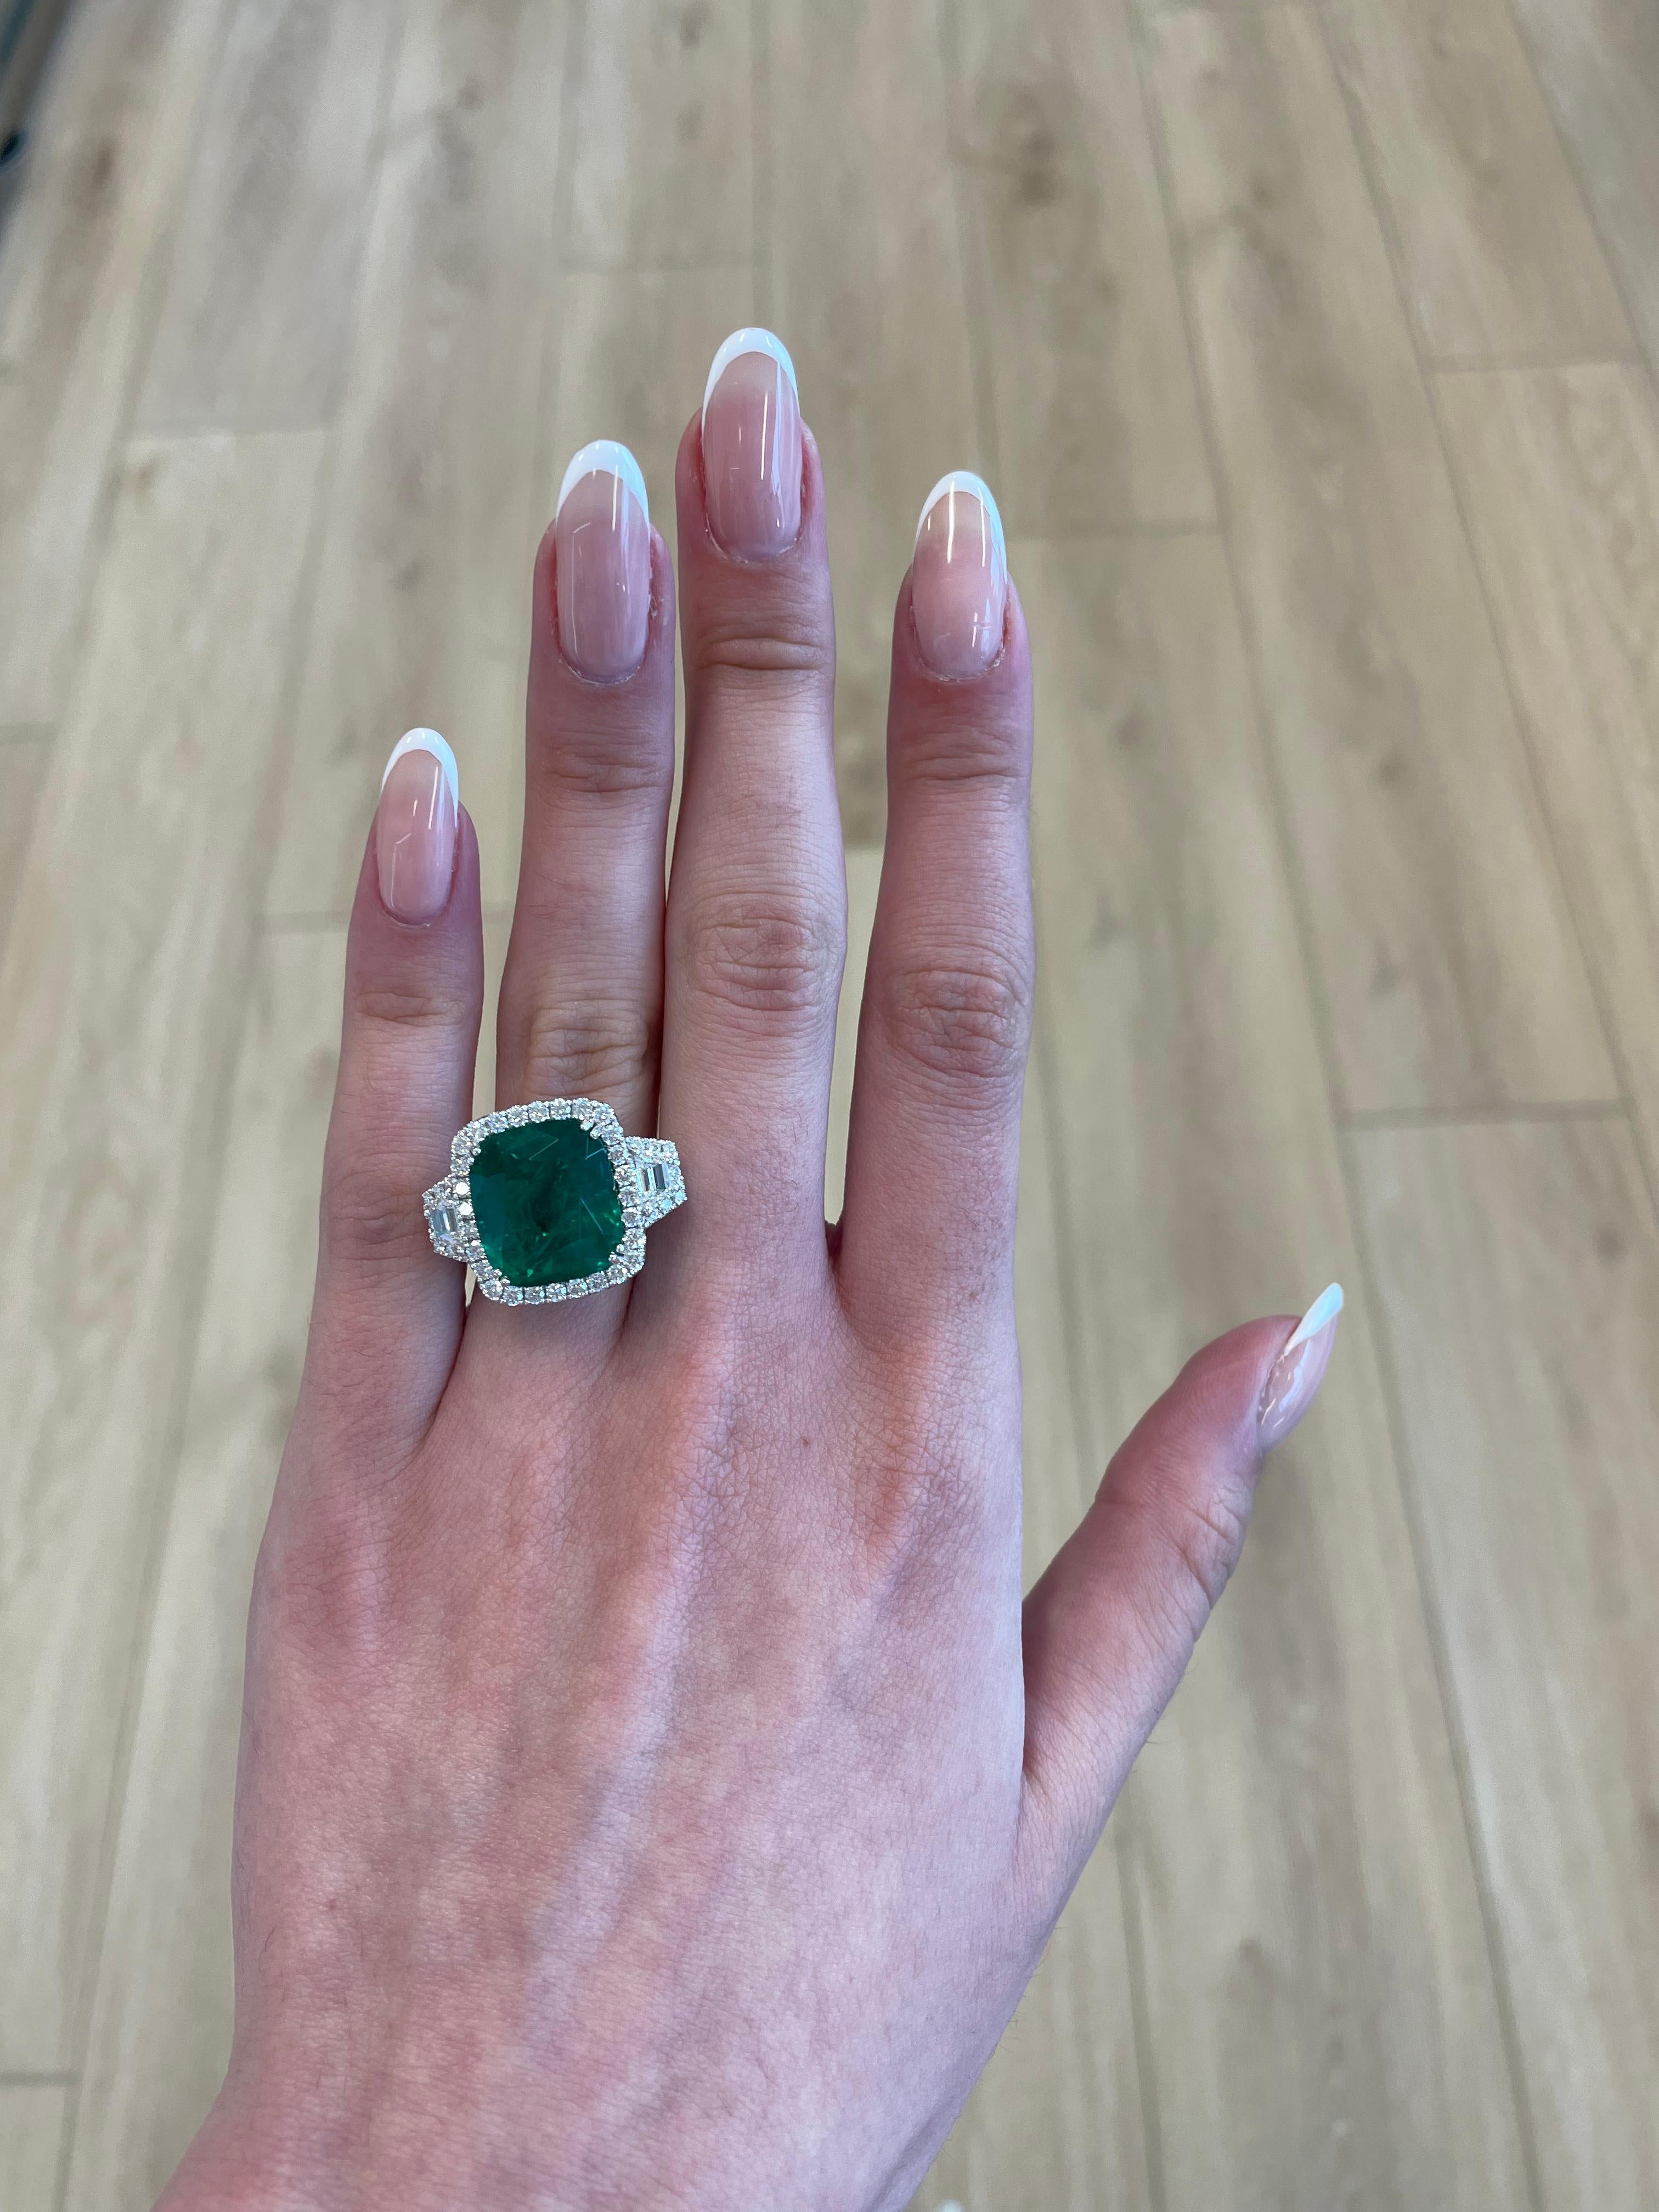 Stunning emerald of superb color and diamond three stone ring with halo. GIA & C. Dunaigre certified emerald and both trapezoid diamonds GIA certified, a total of 4 certificates. High jewelry by Alexander Beverly Hills. 
13.04 carats total gemstone